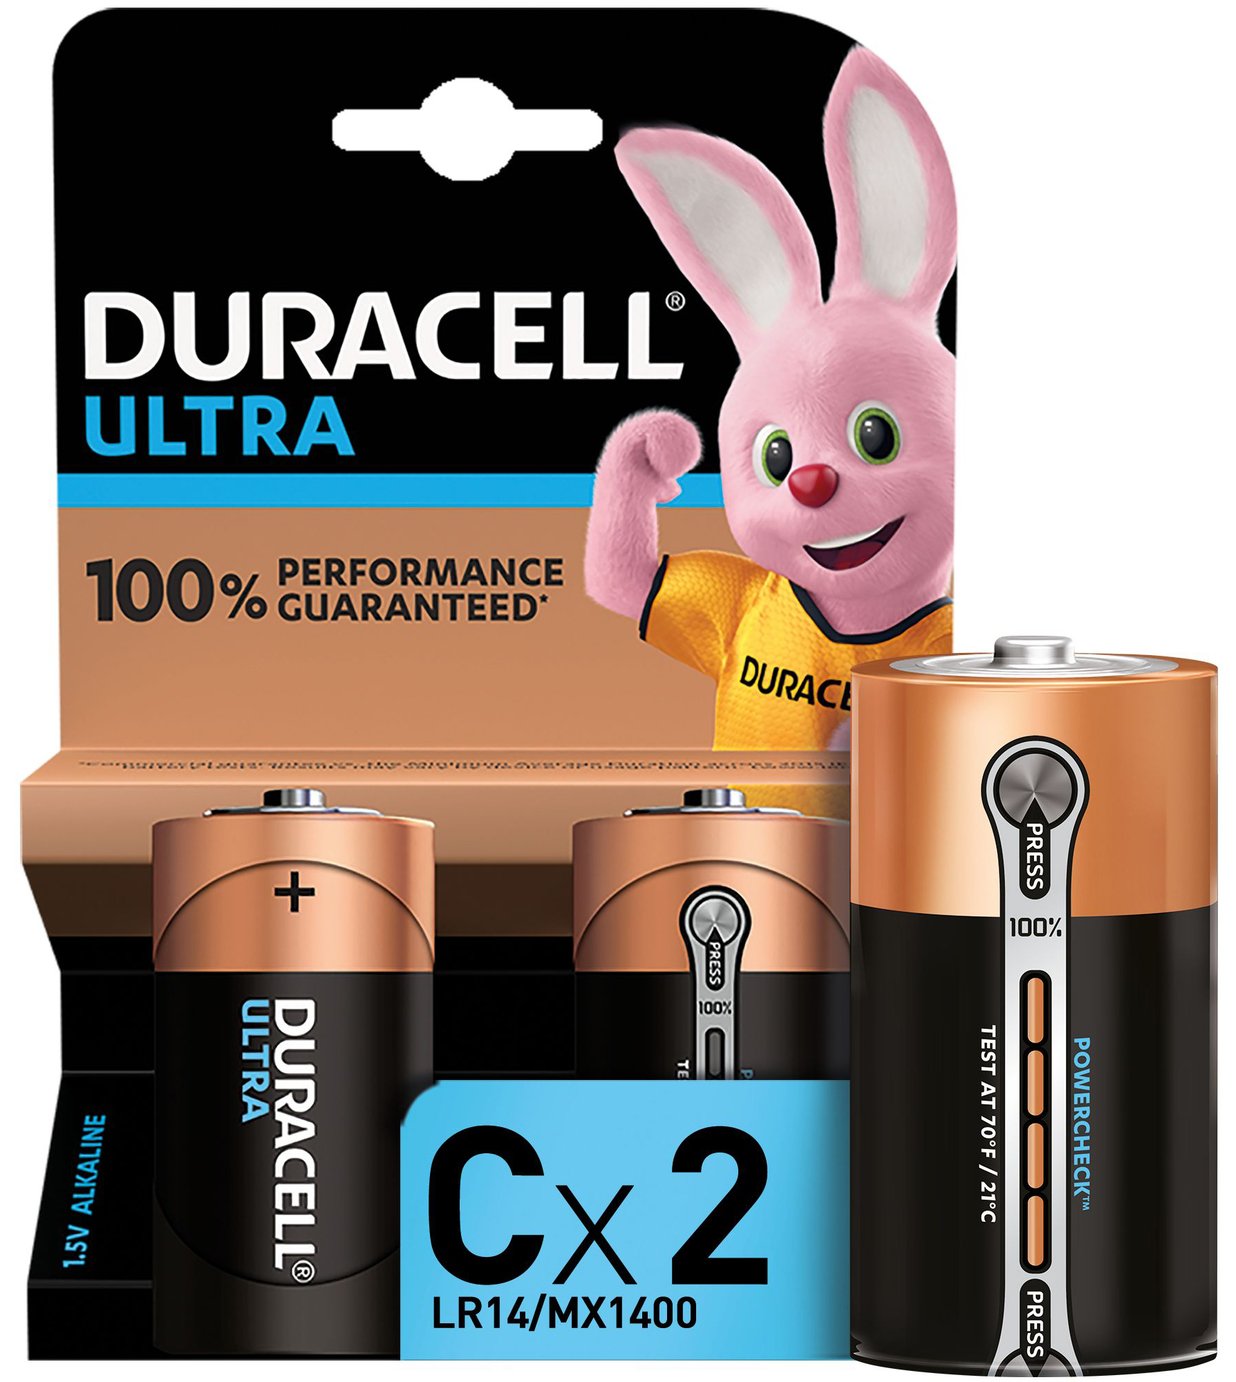 Check out our Duracell Ultra Alkaline C Batteries Reviews now to discover w...